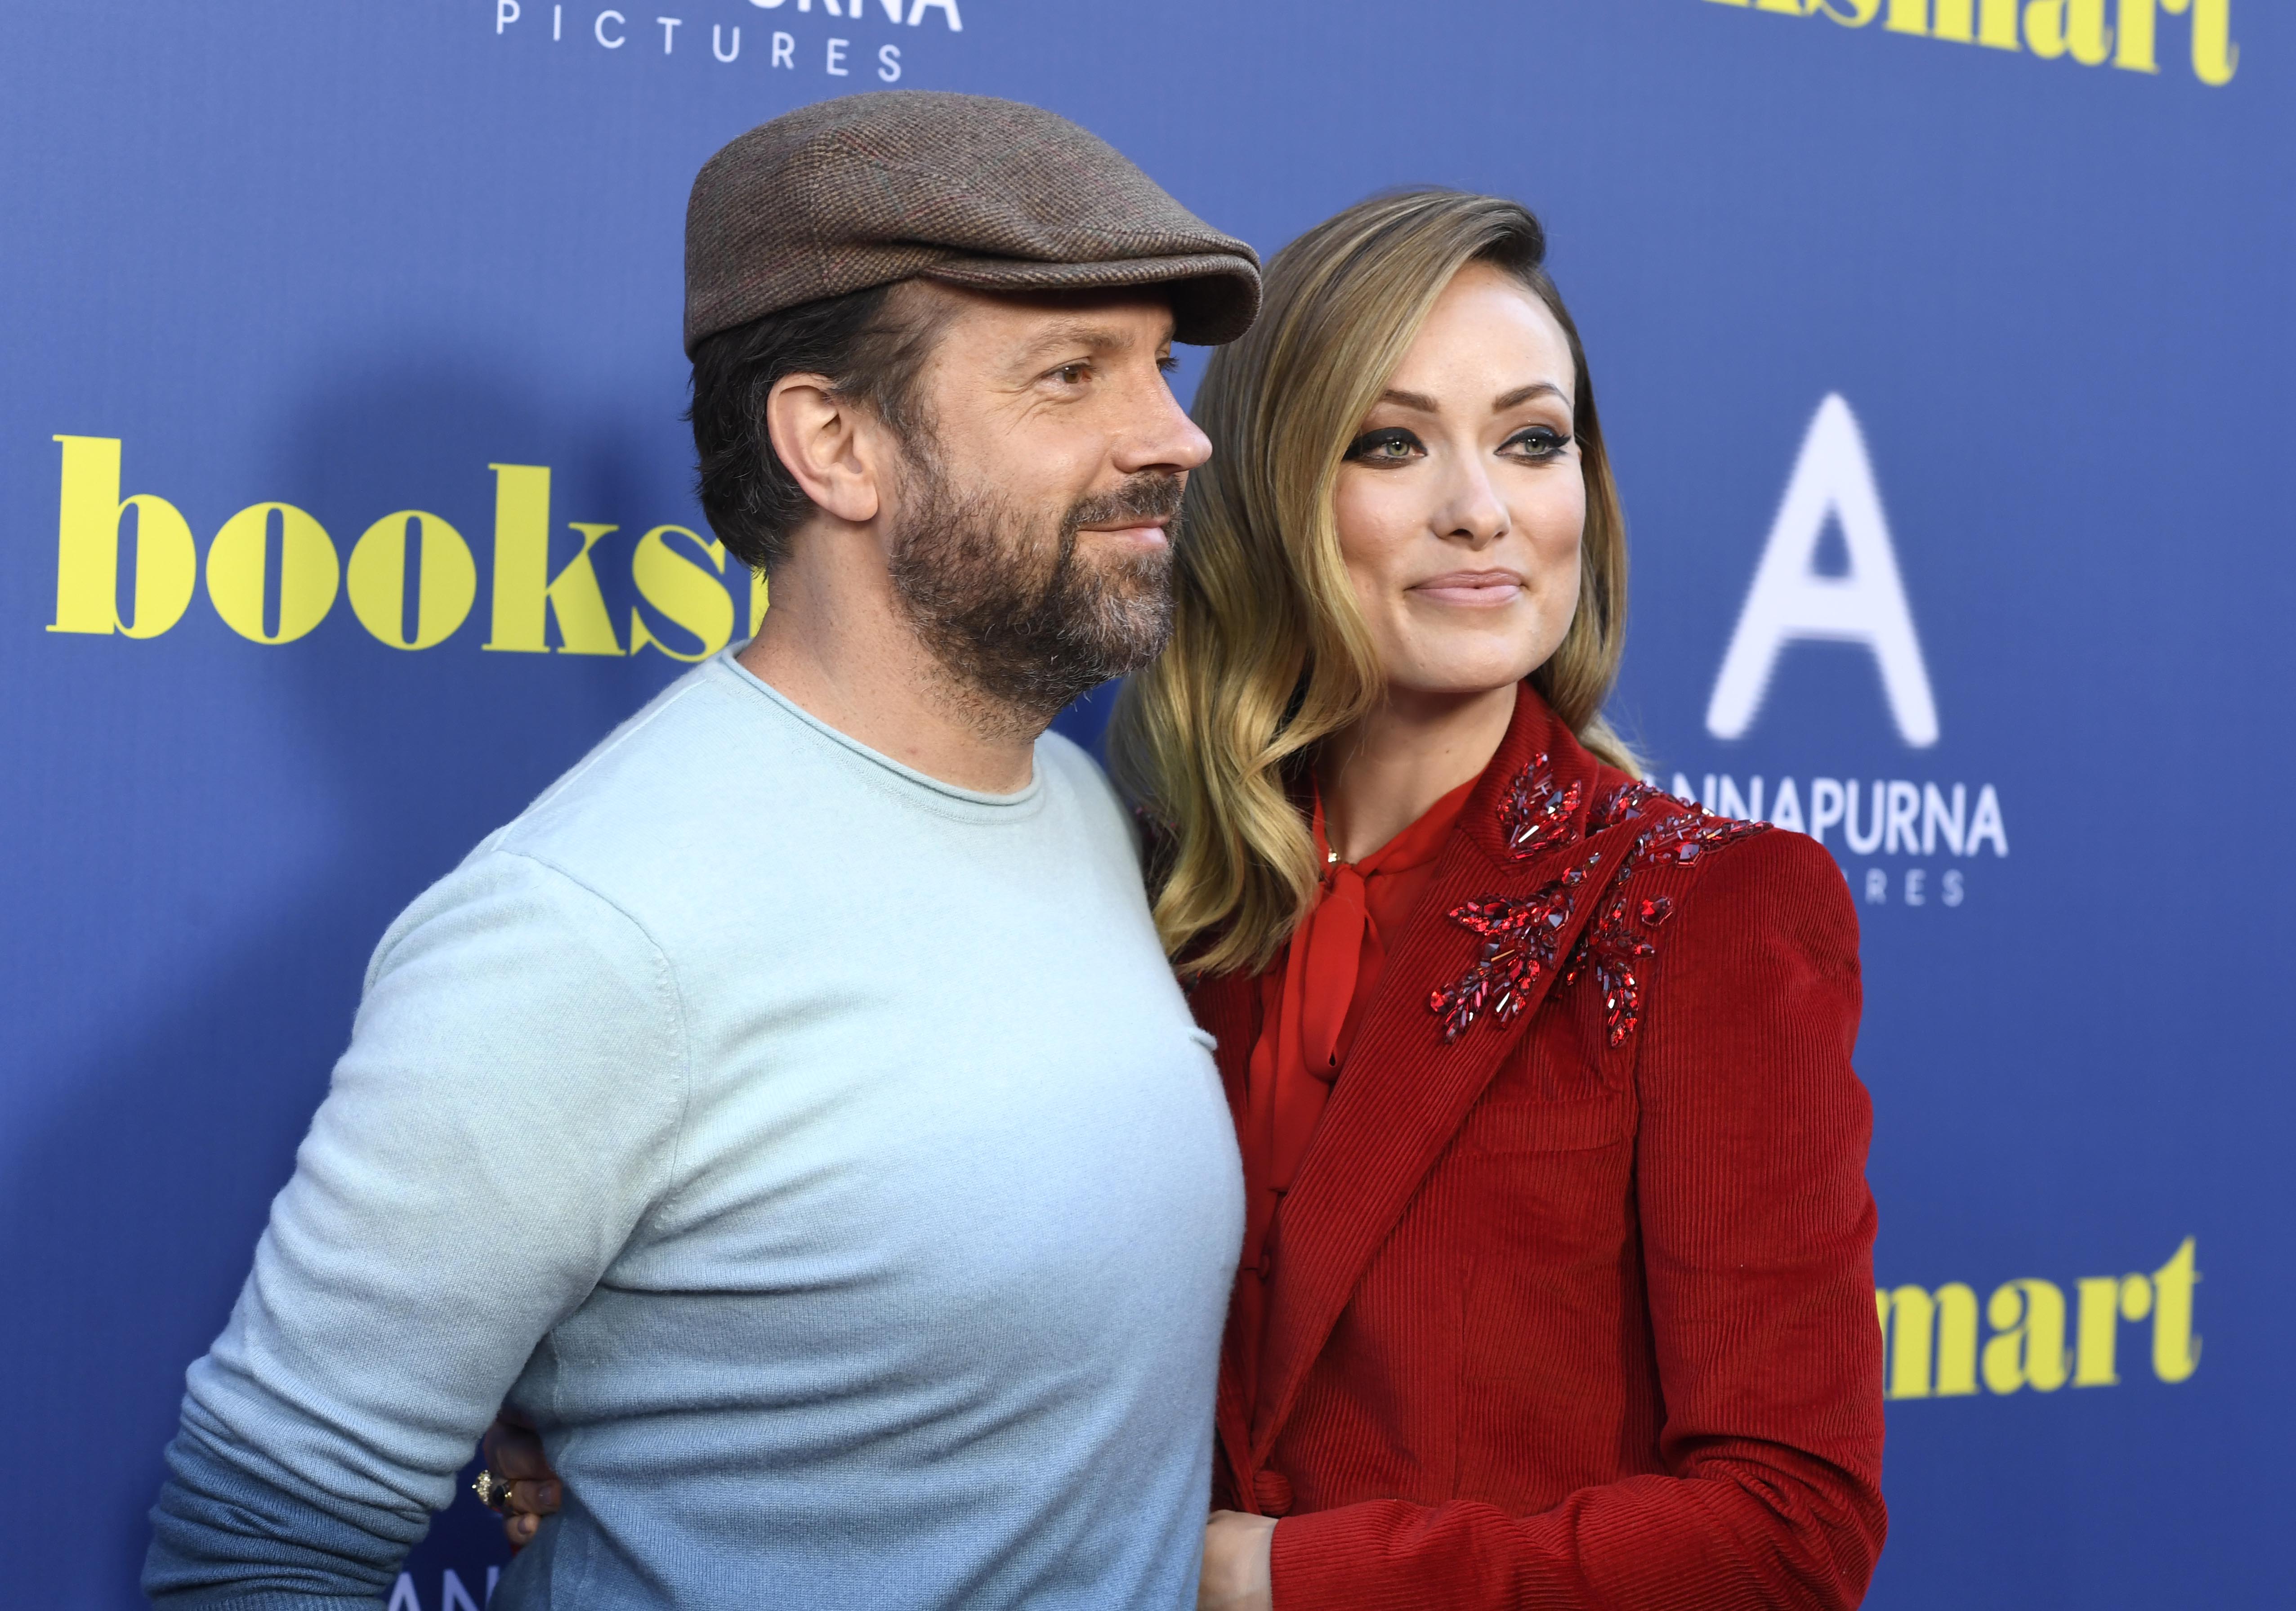 Jason Sudeikis and Olivia Wilde at the screening of "Booksmart", which Wilde directed in Los Angeles, May 2019. " Photo: Getty Images. 